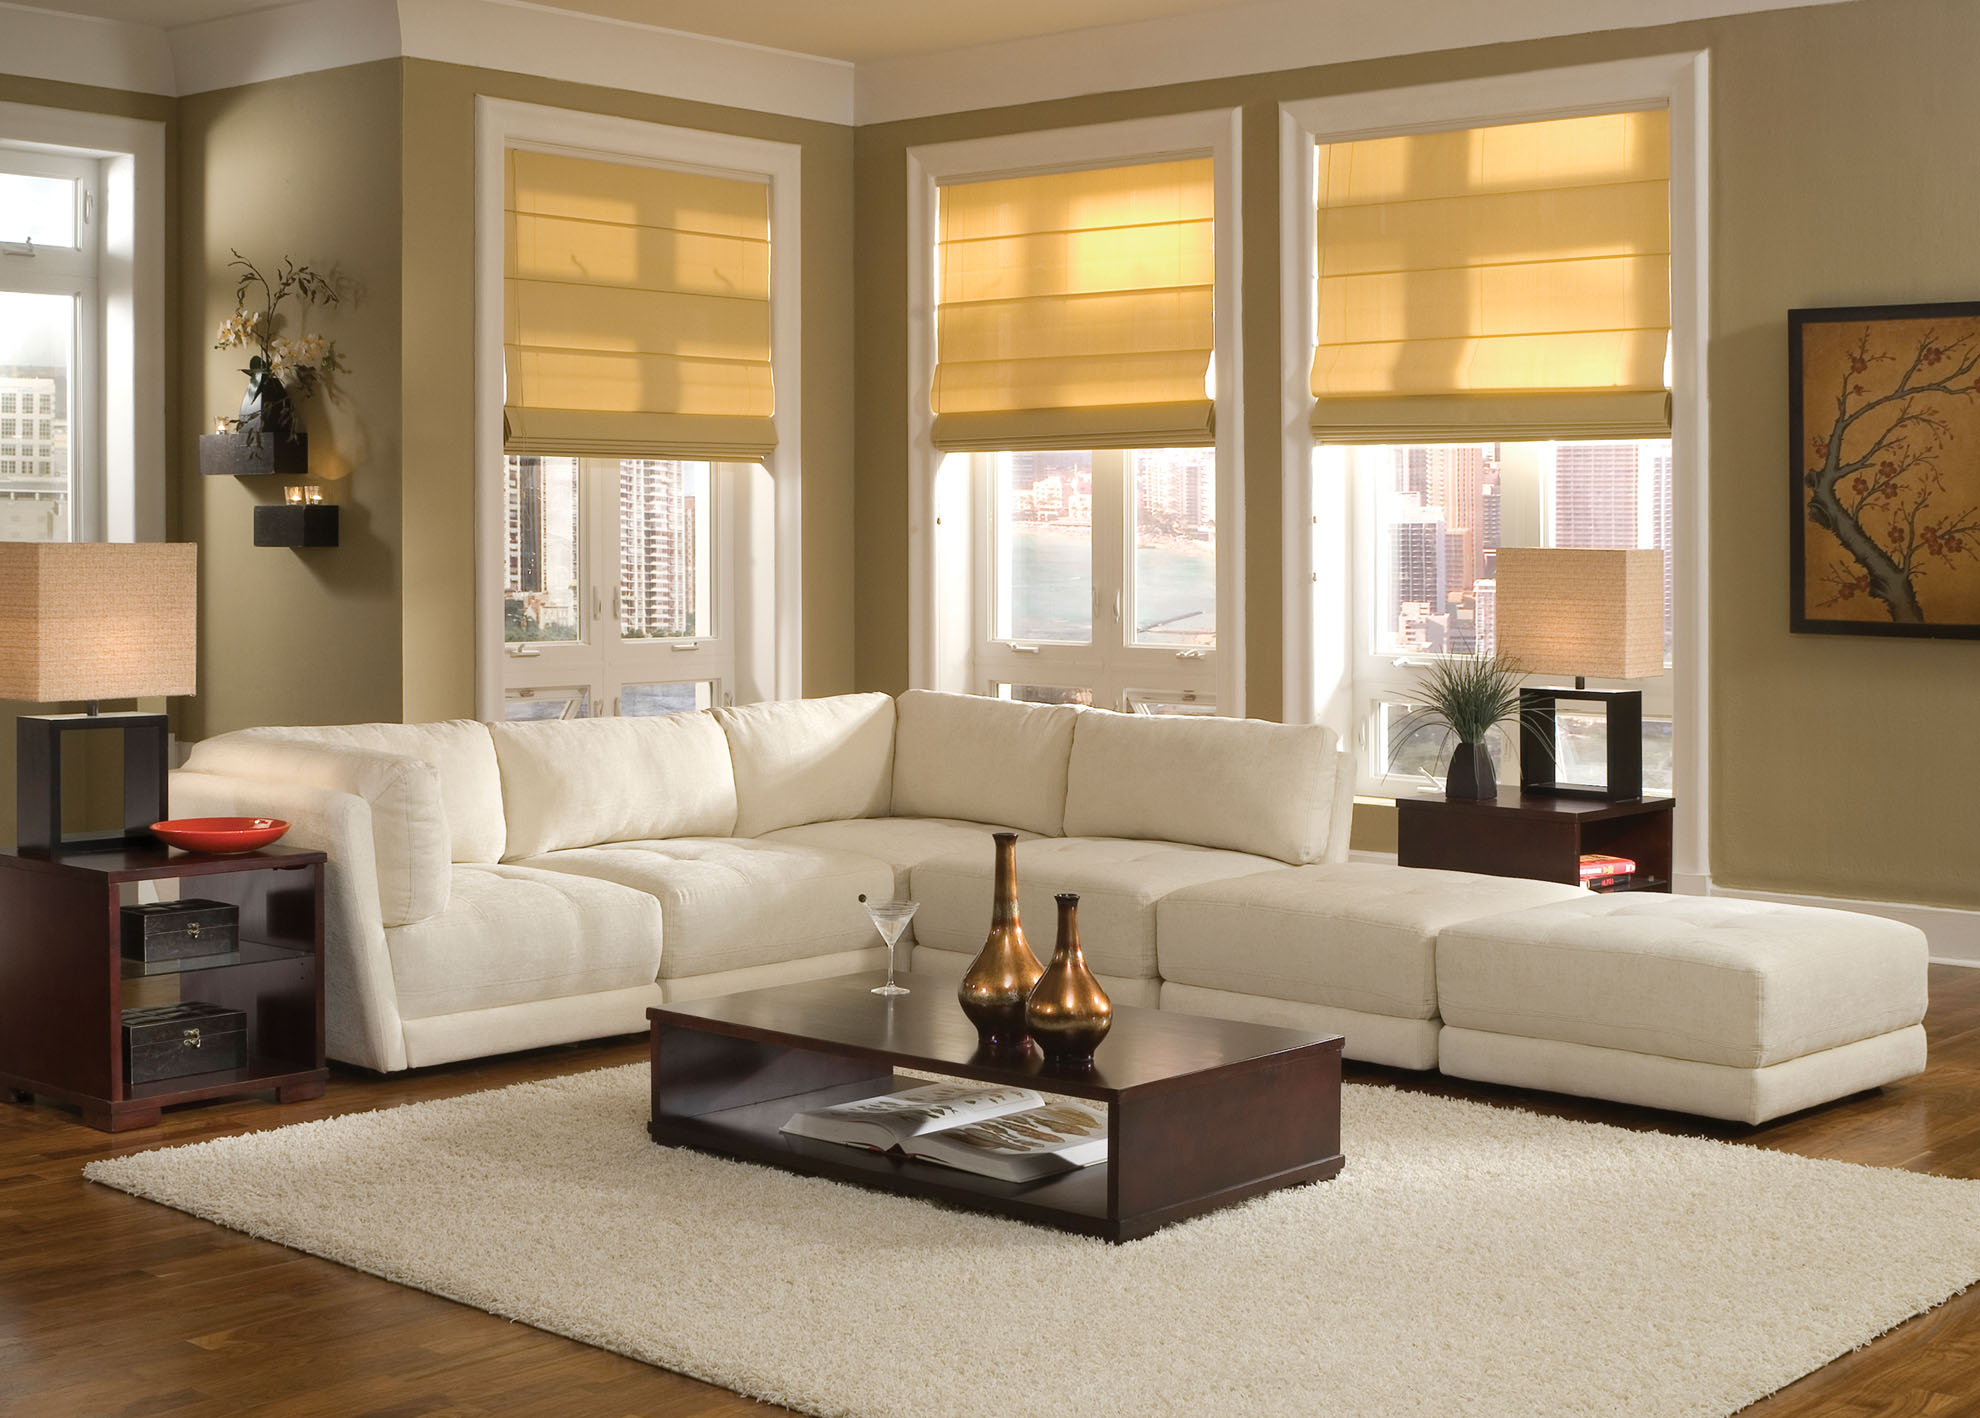 10 Cute Sectional Sofa Living Room Ideas white sofa design ideas pictures for living room 2024